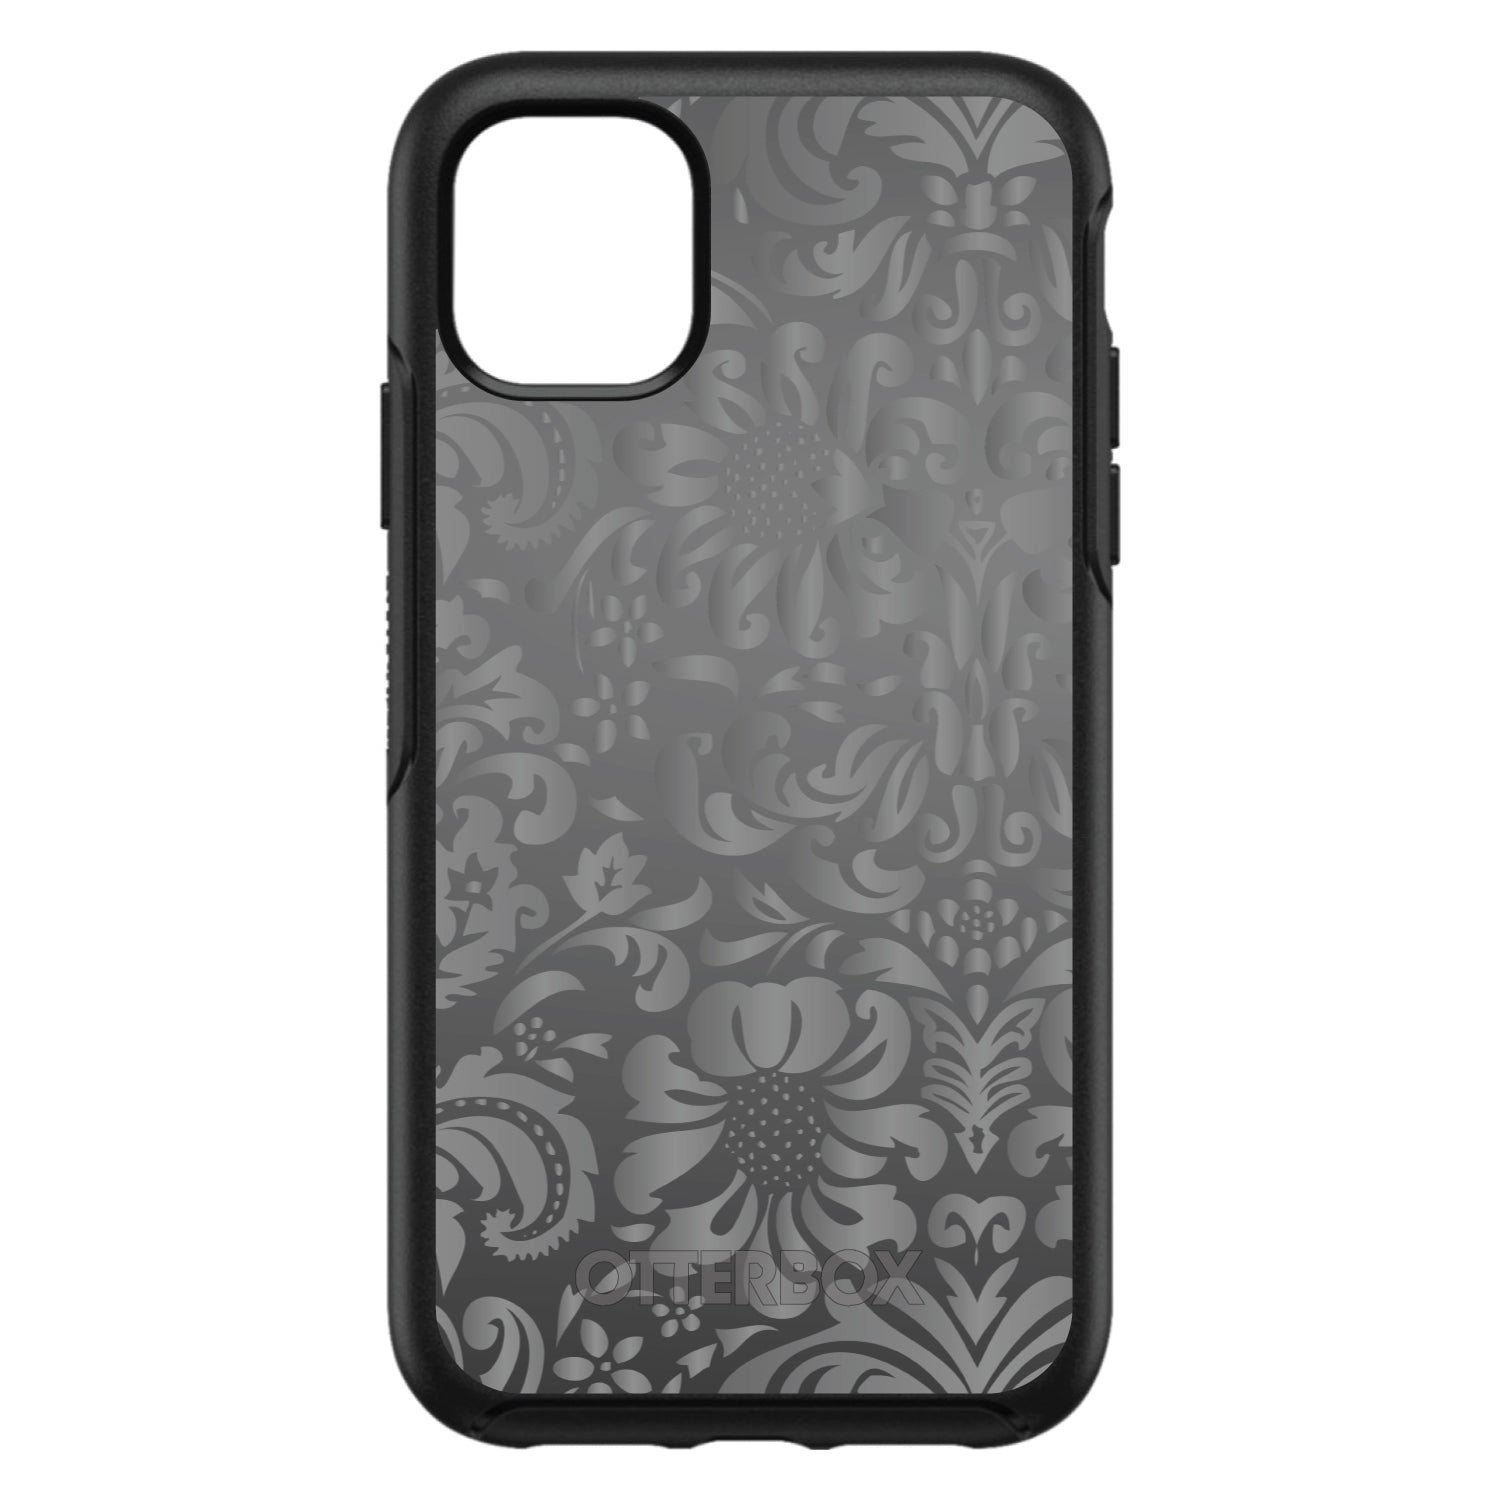 DistinctInk? OtterBox Symmetry Series Case for Apple iPhone / Samsung Galaxy / Google Pixel - Shades of Grey Floral Pattern